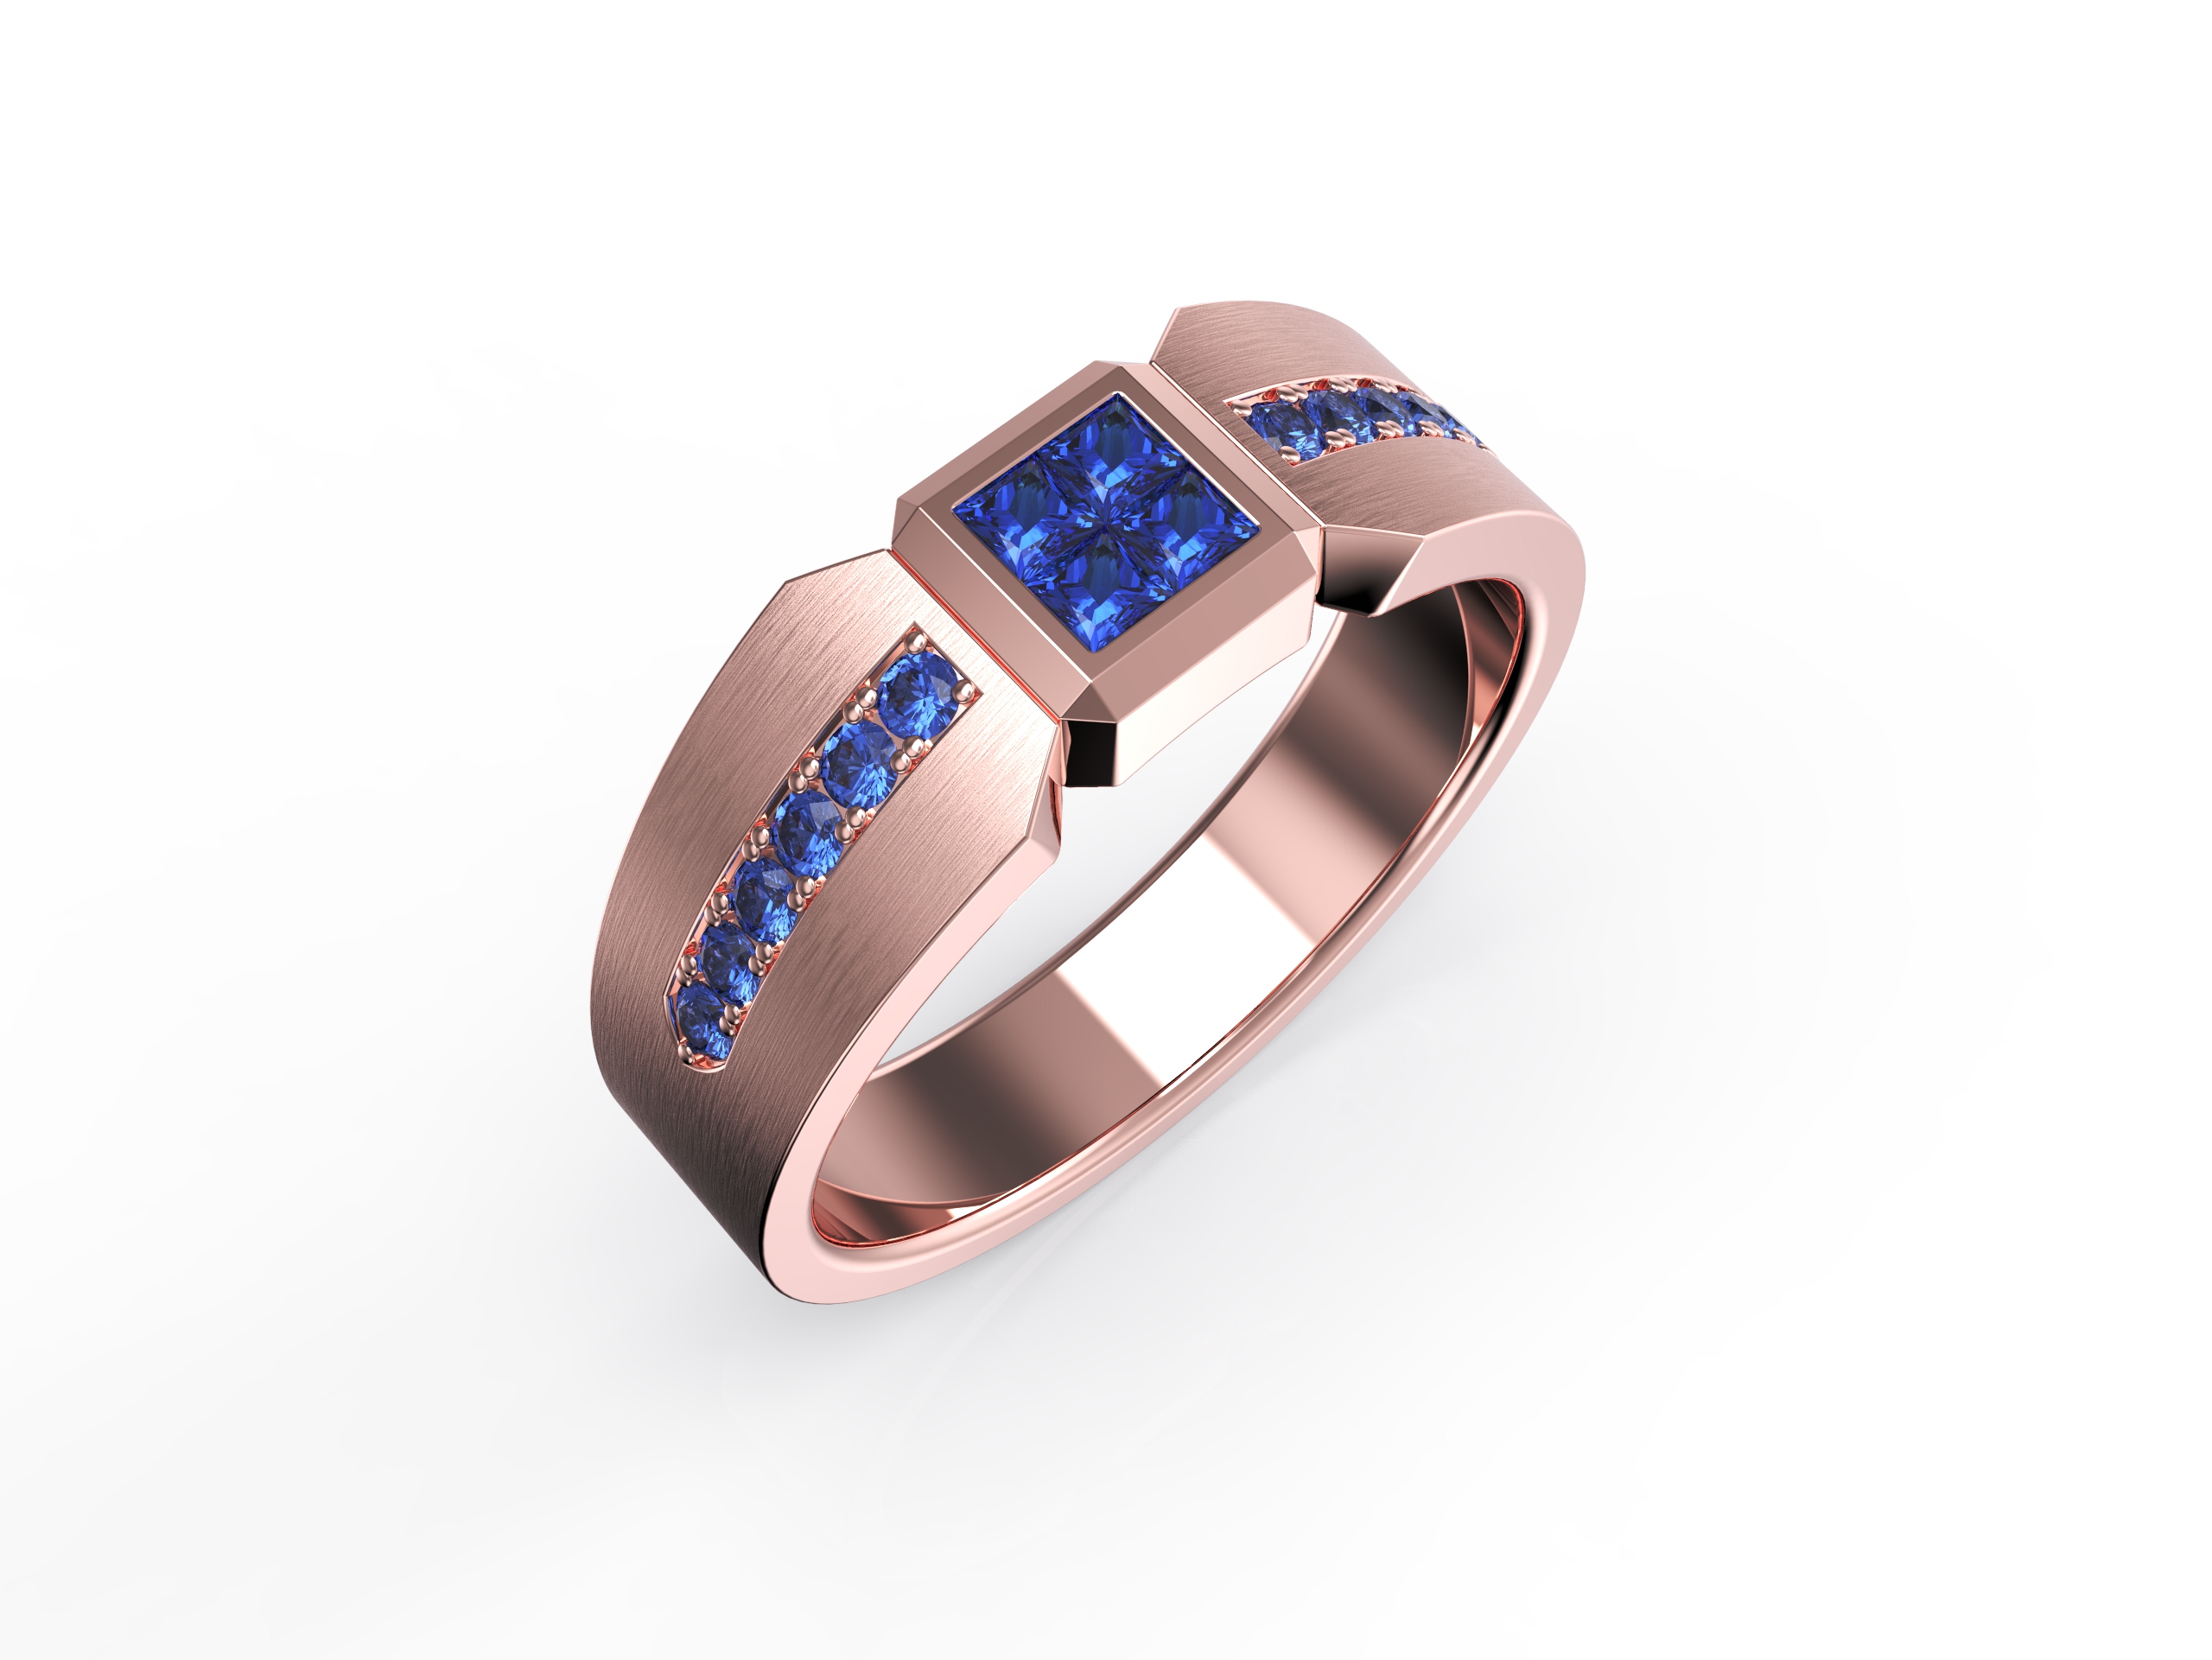 men's rose gold ring with blue sapphire stones